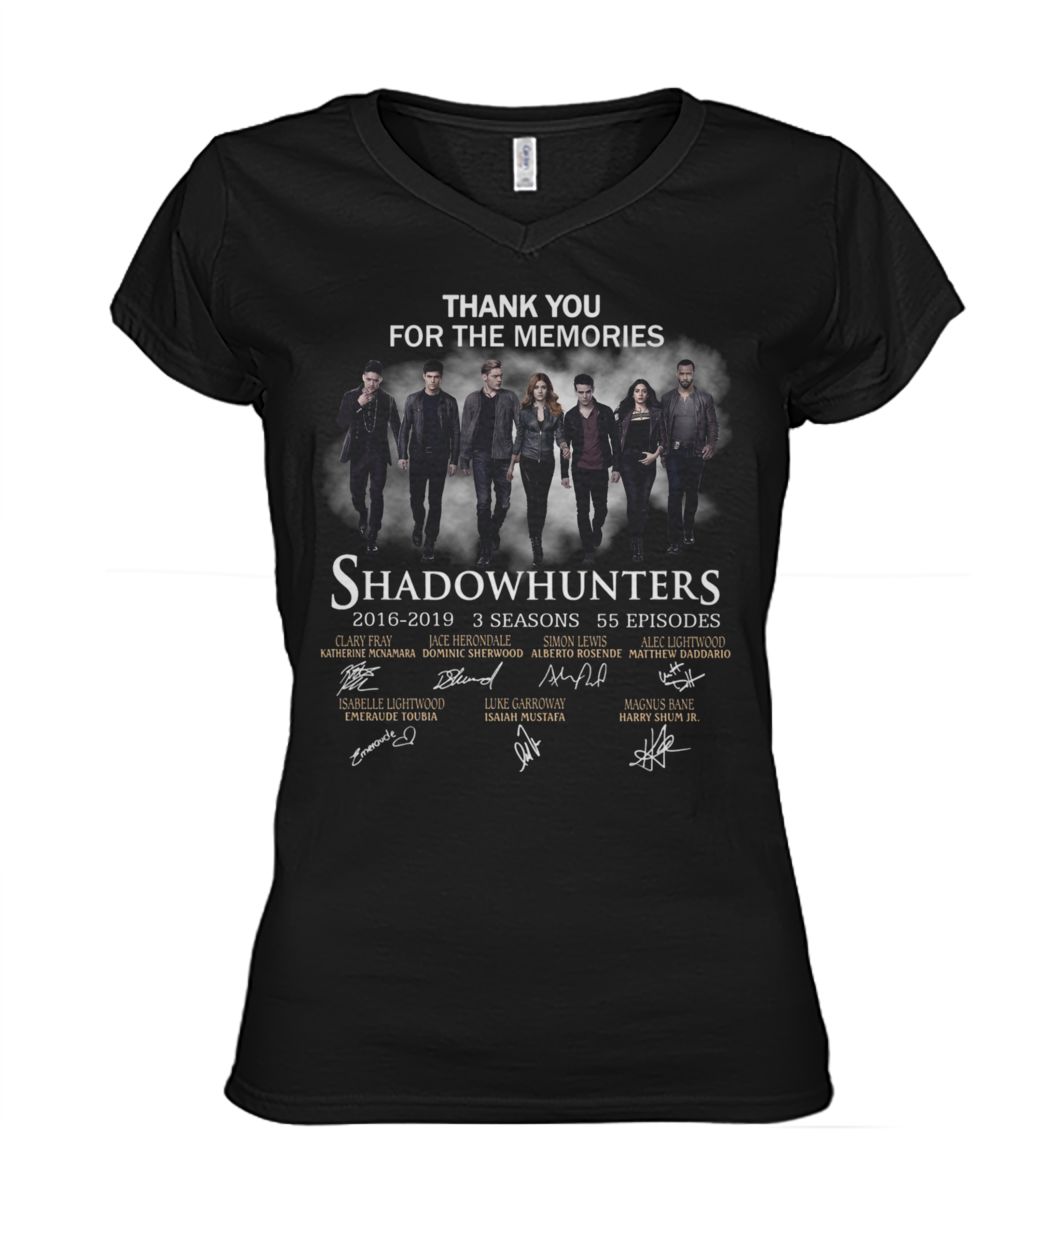 Thank you for the memories shadowhunters 2016-2019 3 seasons 55 episodes signatures women's v-neck